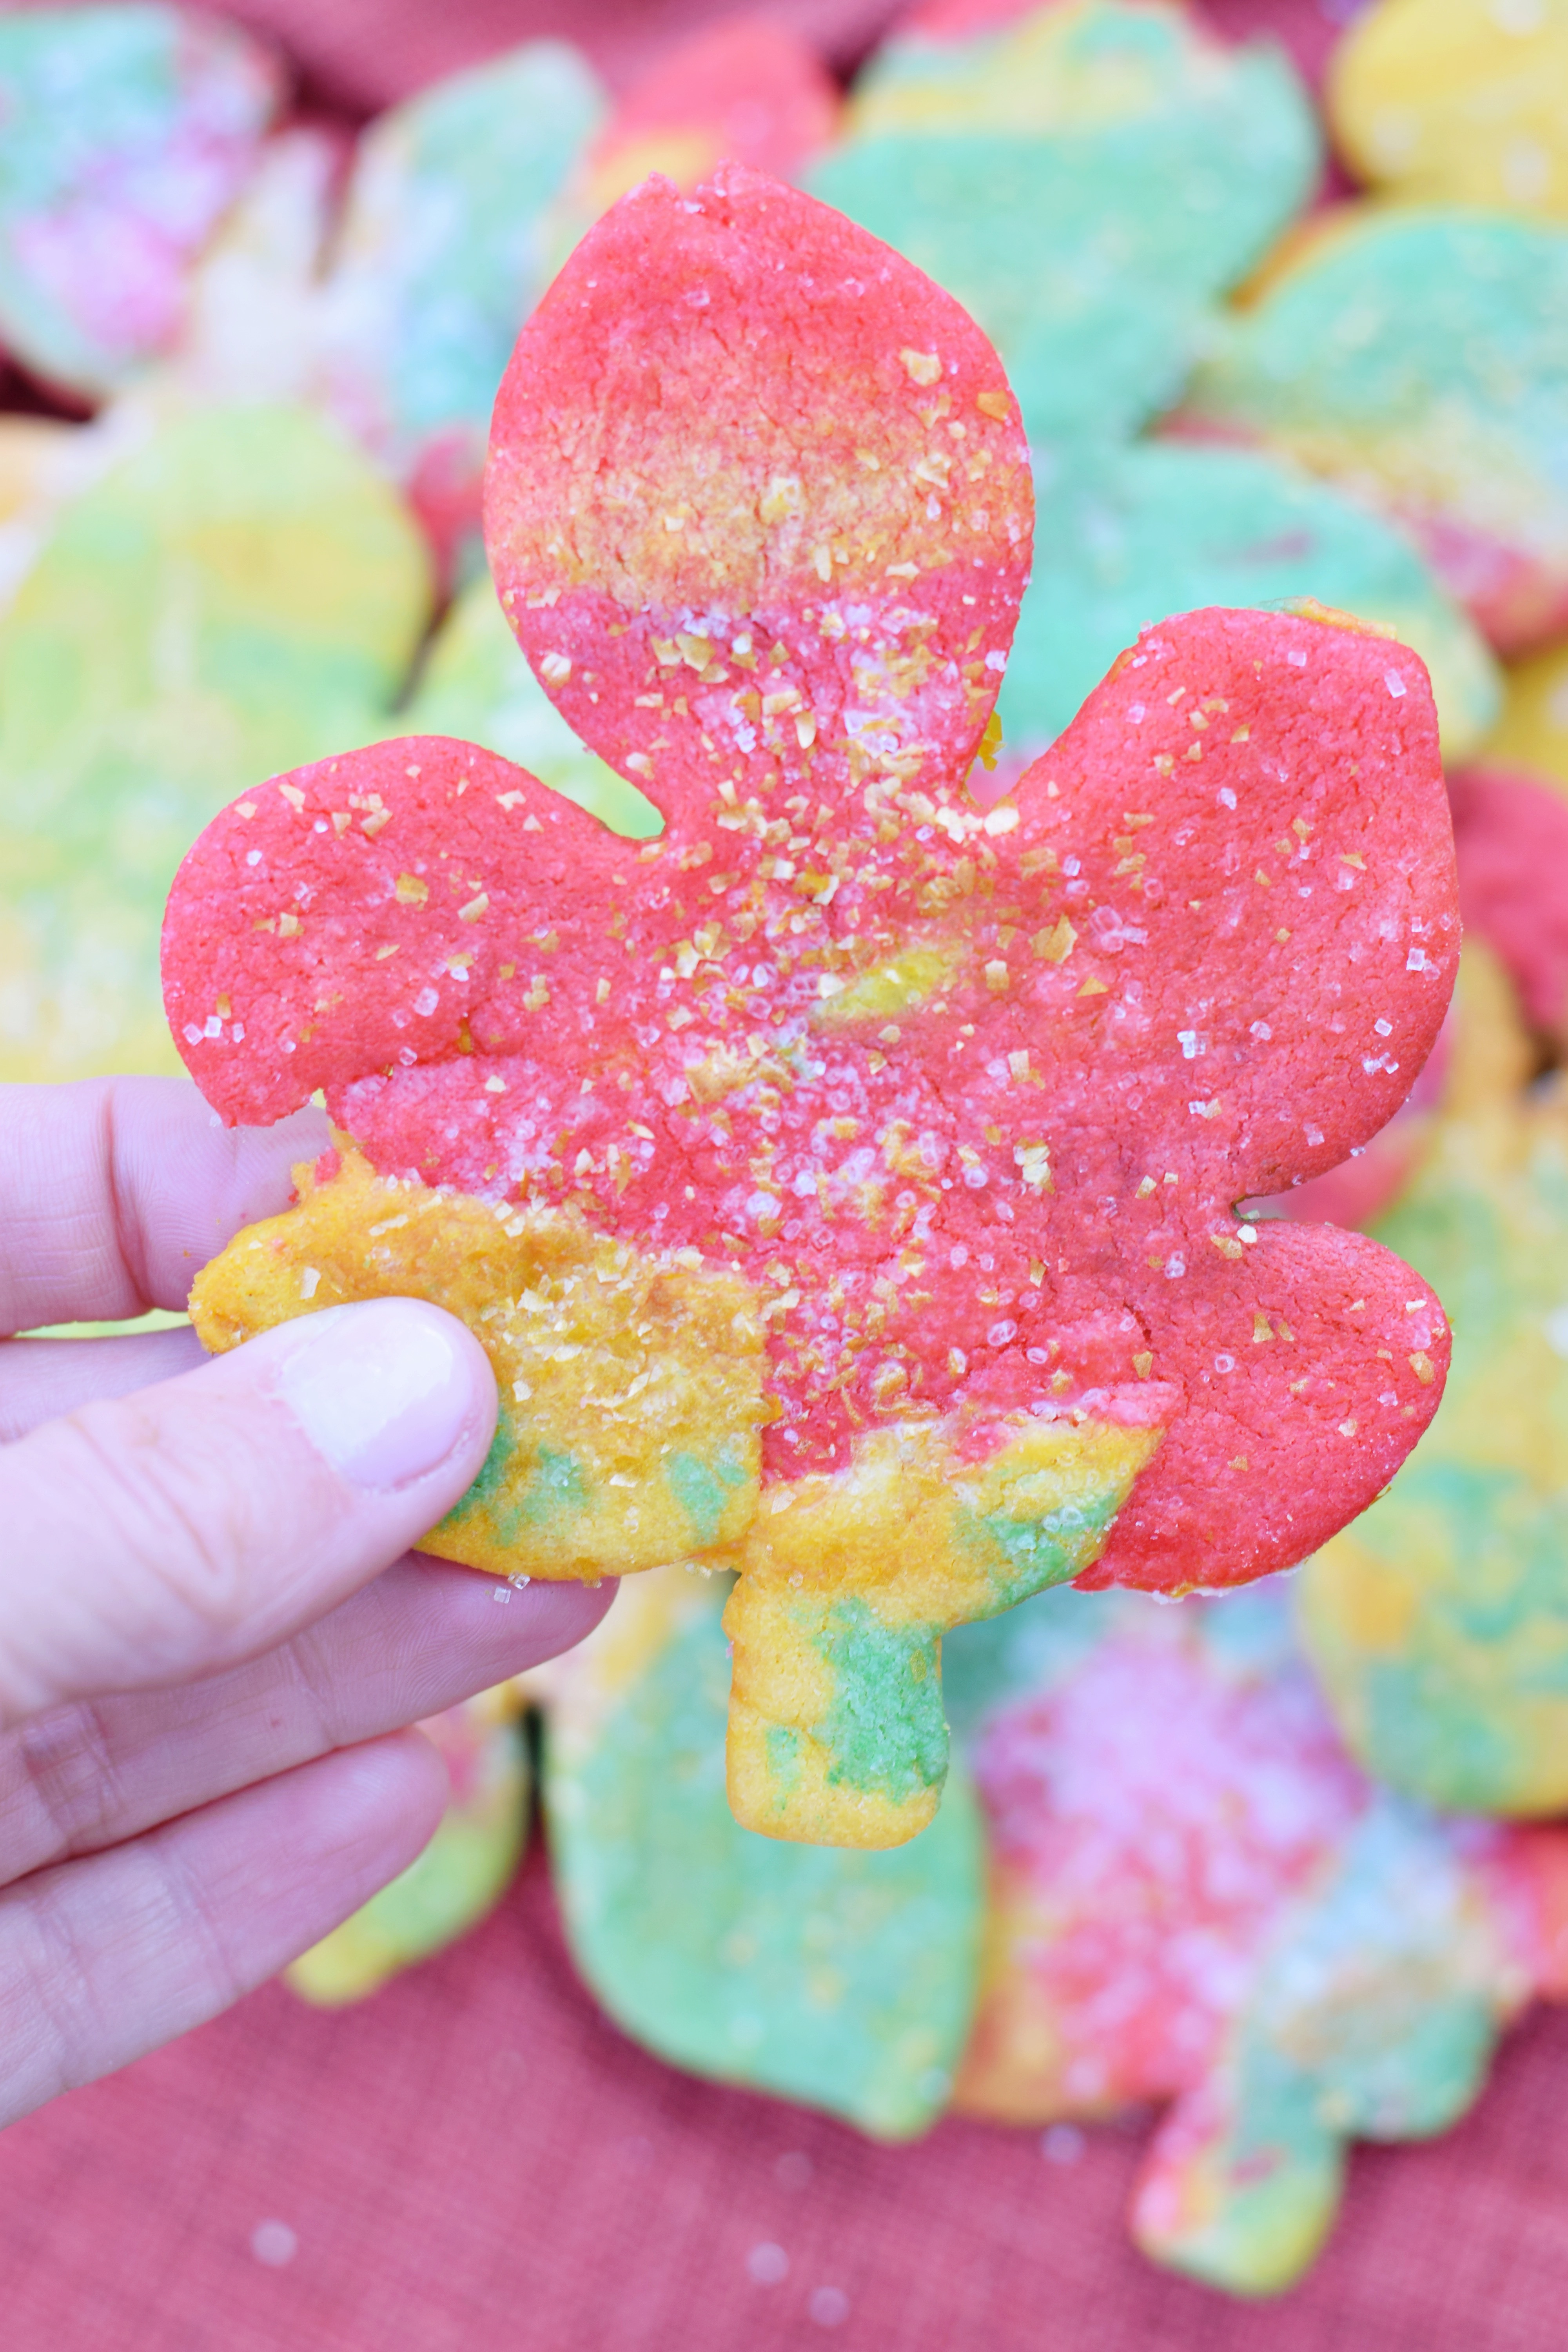 Fun Tie-Dye Fall Leaf Cookies that are perfect for any festive fall occasion! - Fall Cookie Recipe - Maple Leaf Cookies - Easy Fall Dessert Recipe - Easy Cookies For Fall - Communikait by Kait Hanson